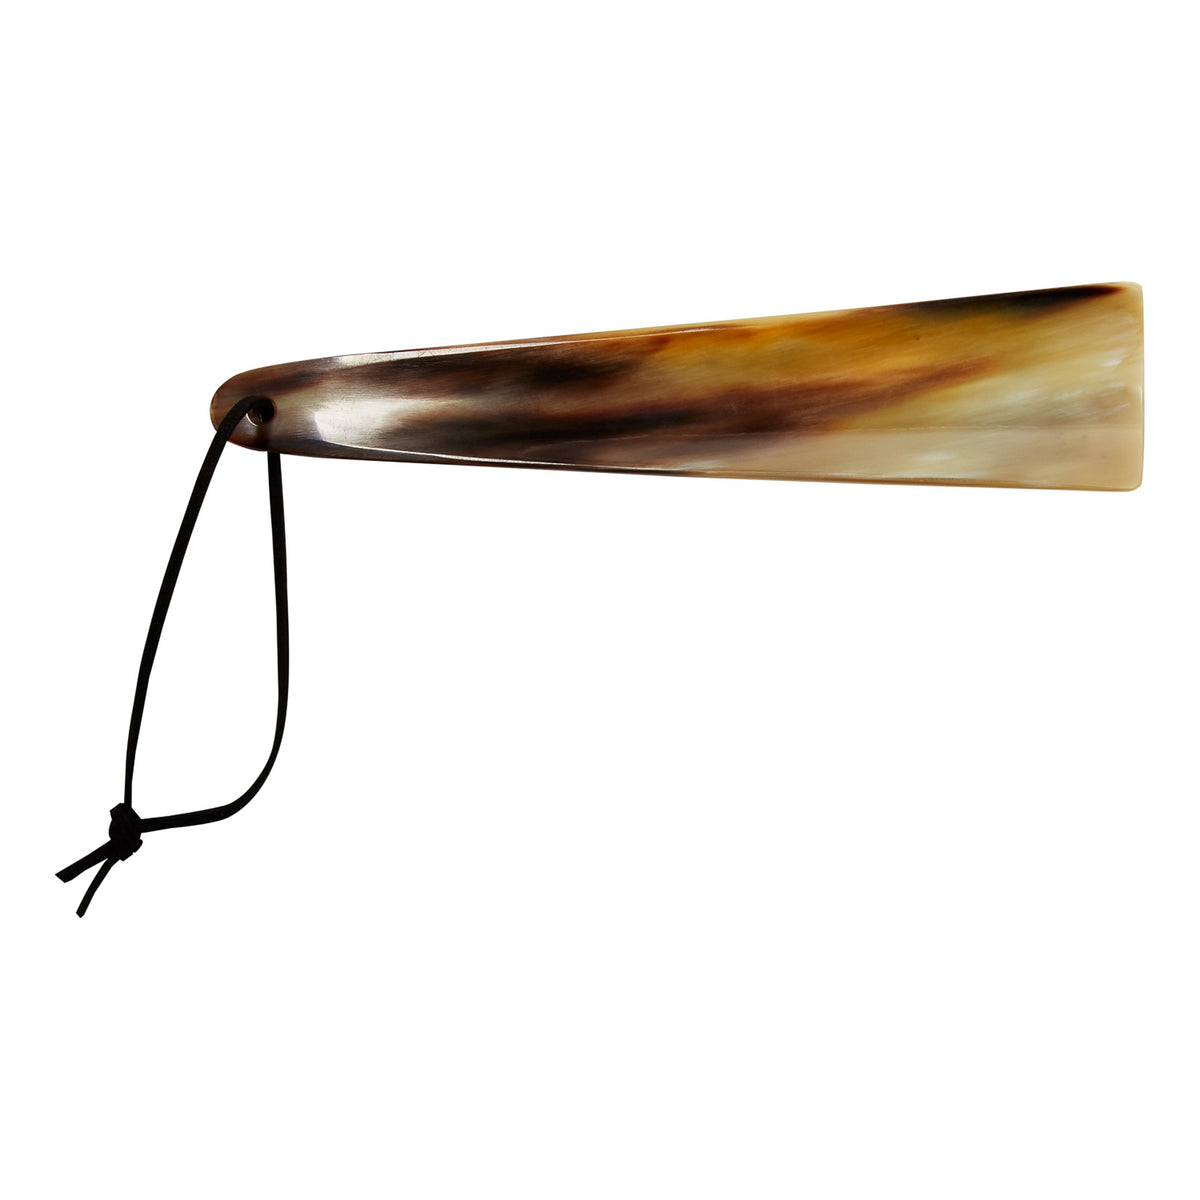 A KirbyAllison.com Wellington 8-inch Shoehorn made of ox horn with a black handle on a white background.